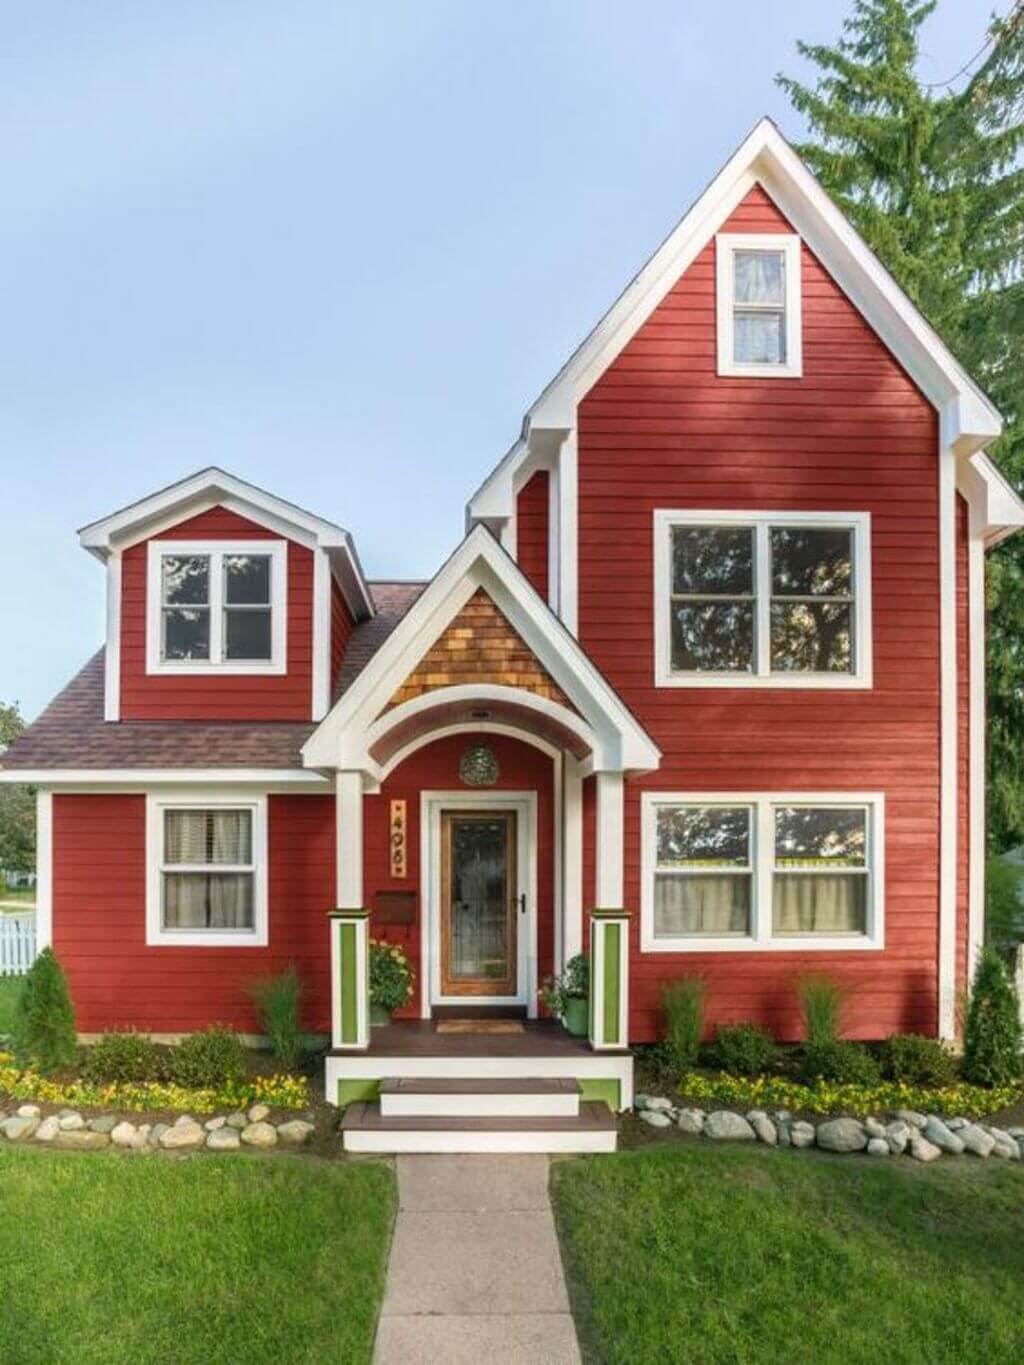 Red + White + Brown house exterior paints